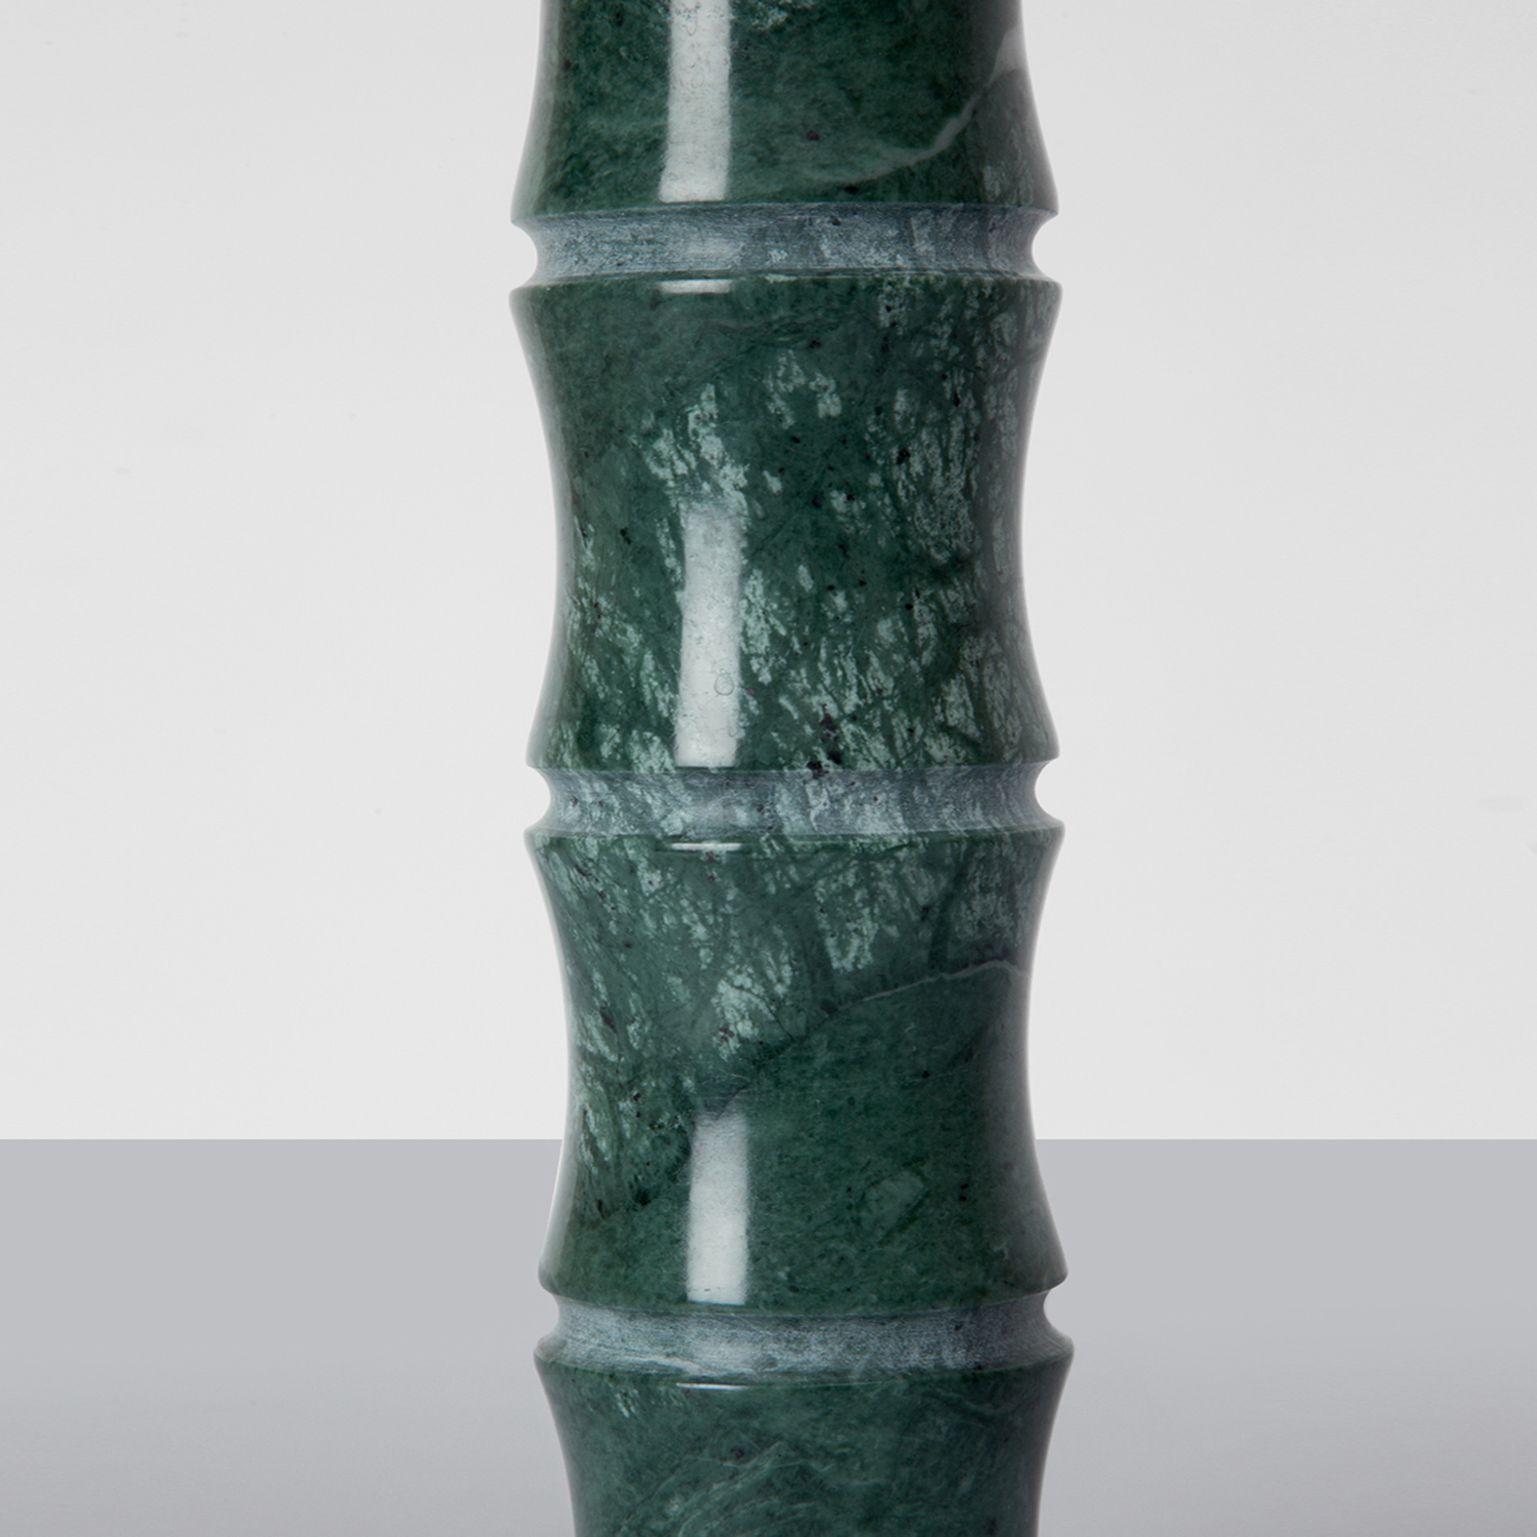 Kadomatsu candle holder large by Michele Chiossi
Jap Vegetation Collection
Dimensions: 5 x 27 cm
Materials: Verde Guatemala

A zigzag line defines the illusory border between art and design. Chiossi crosses it entirely by creating a collection